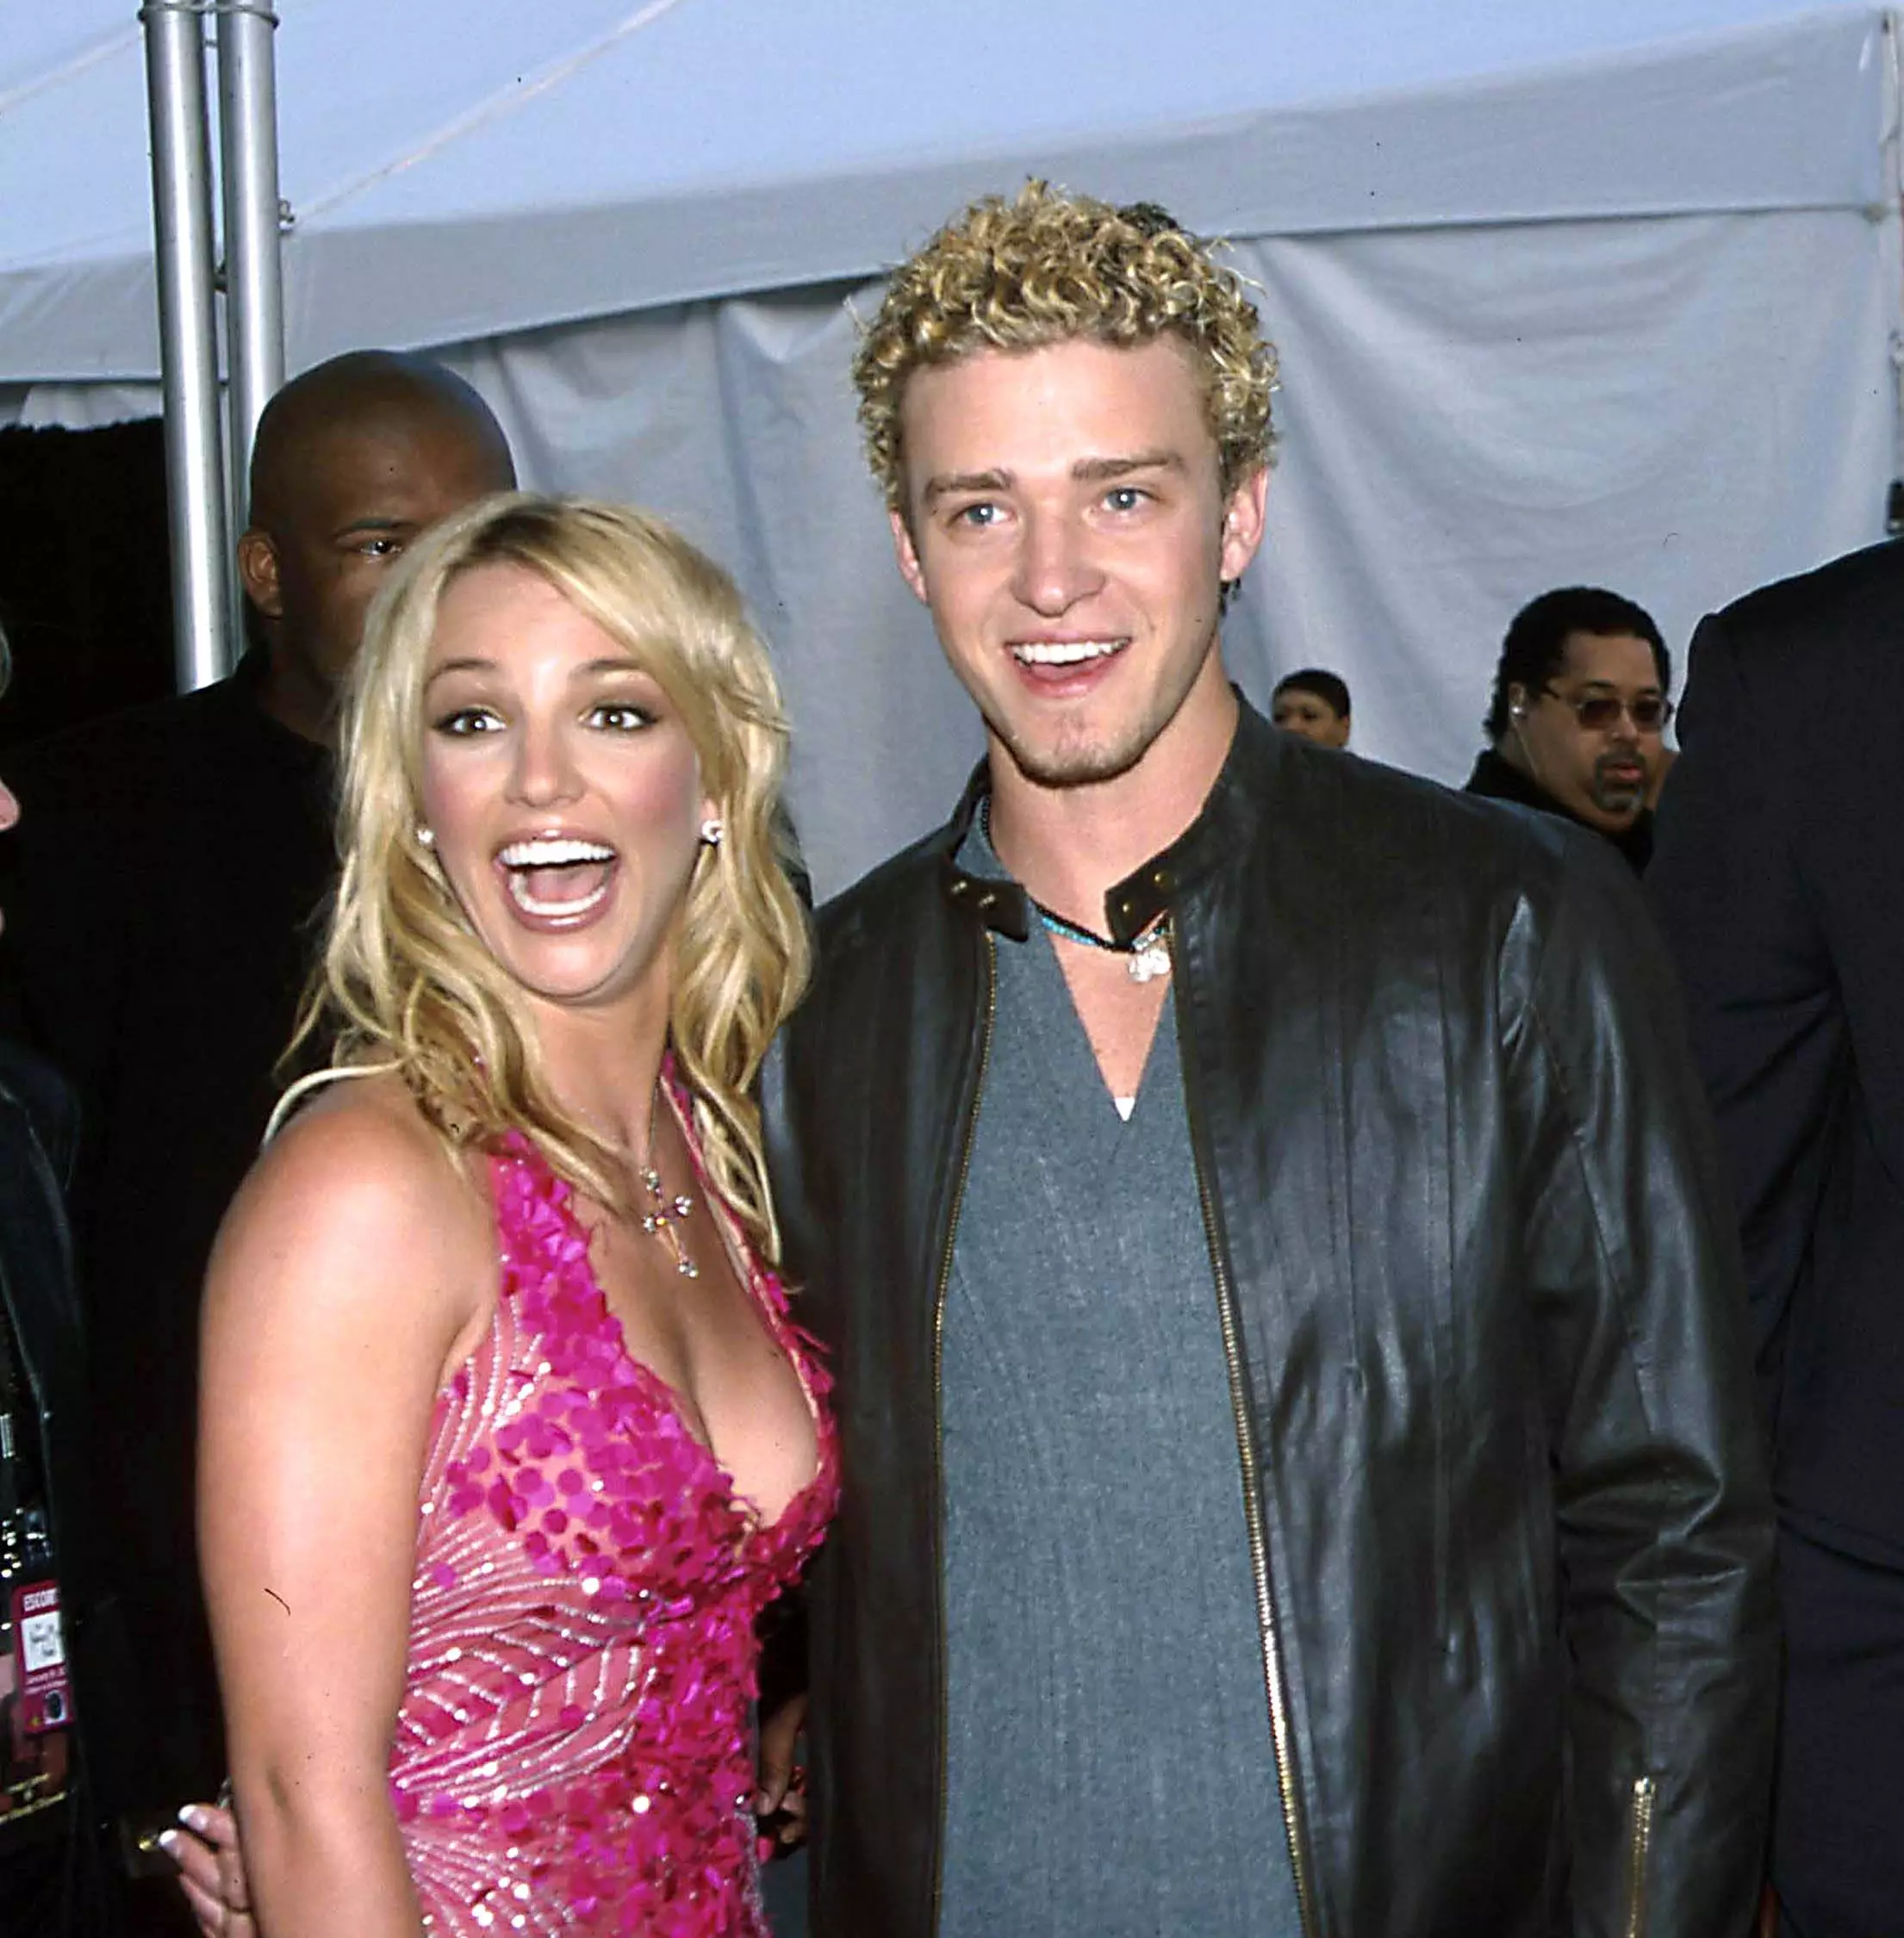 Justin Timberlake and Britney Spears were America's golden couple (